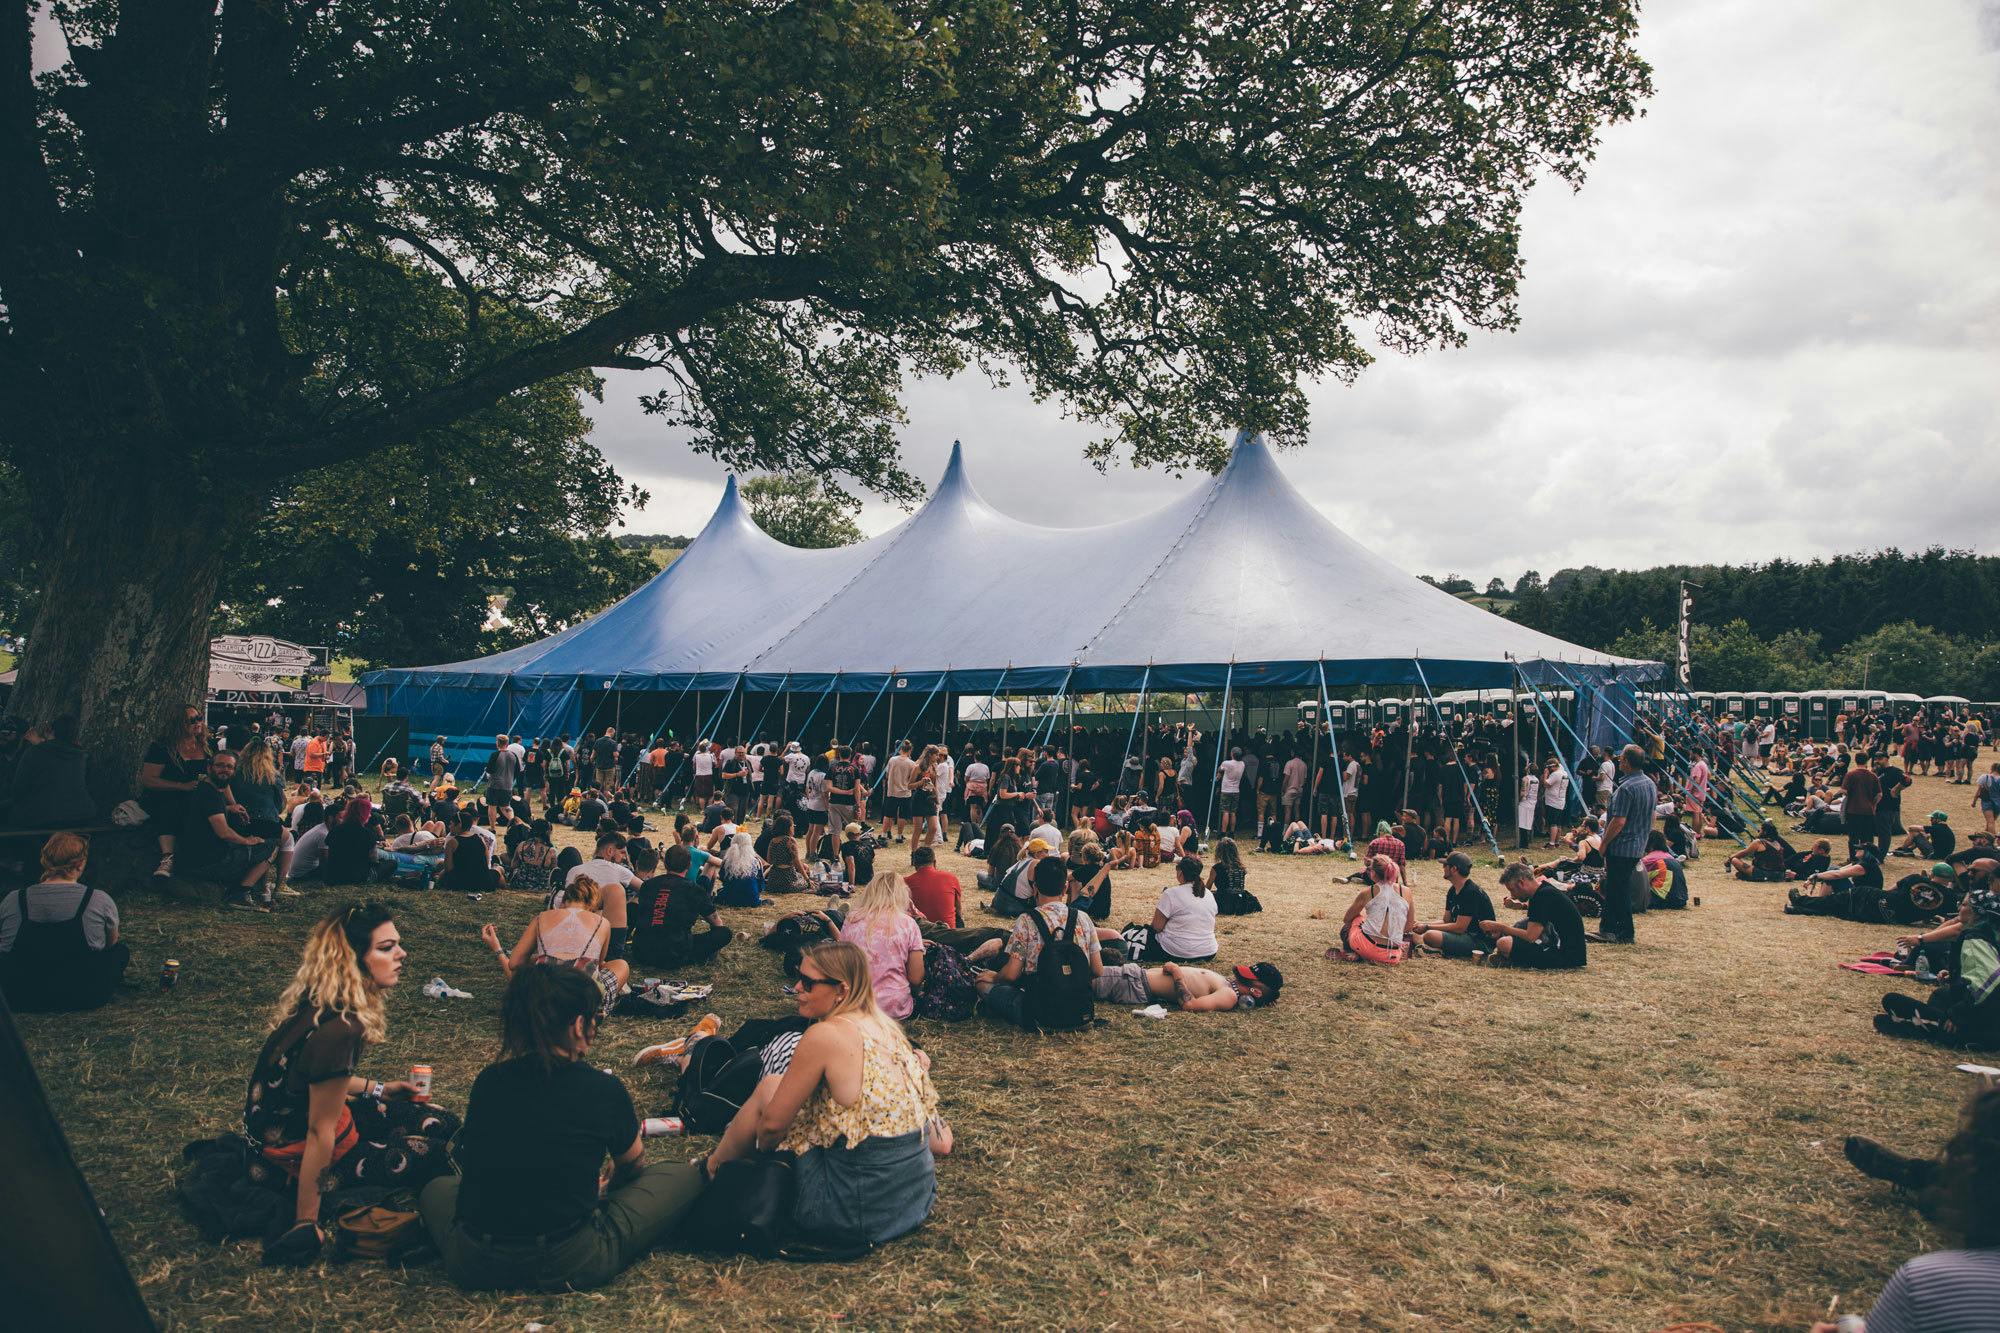 How Festivals Could Take Place Next Year